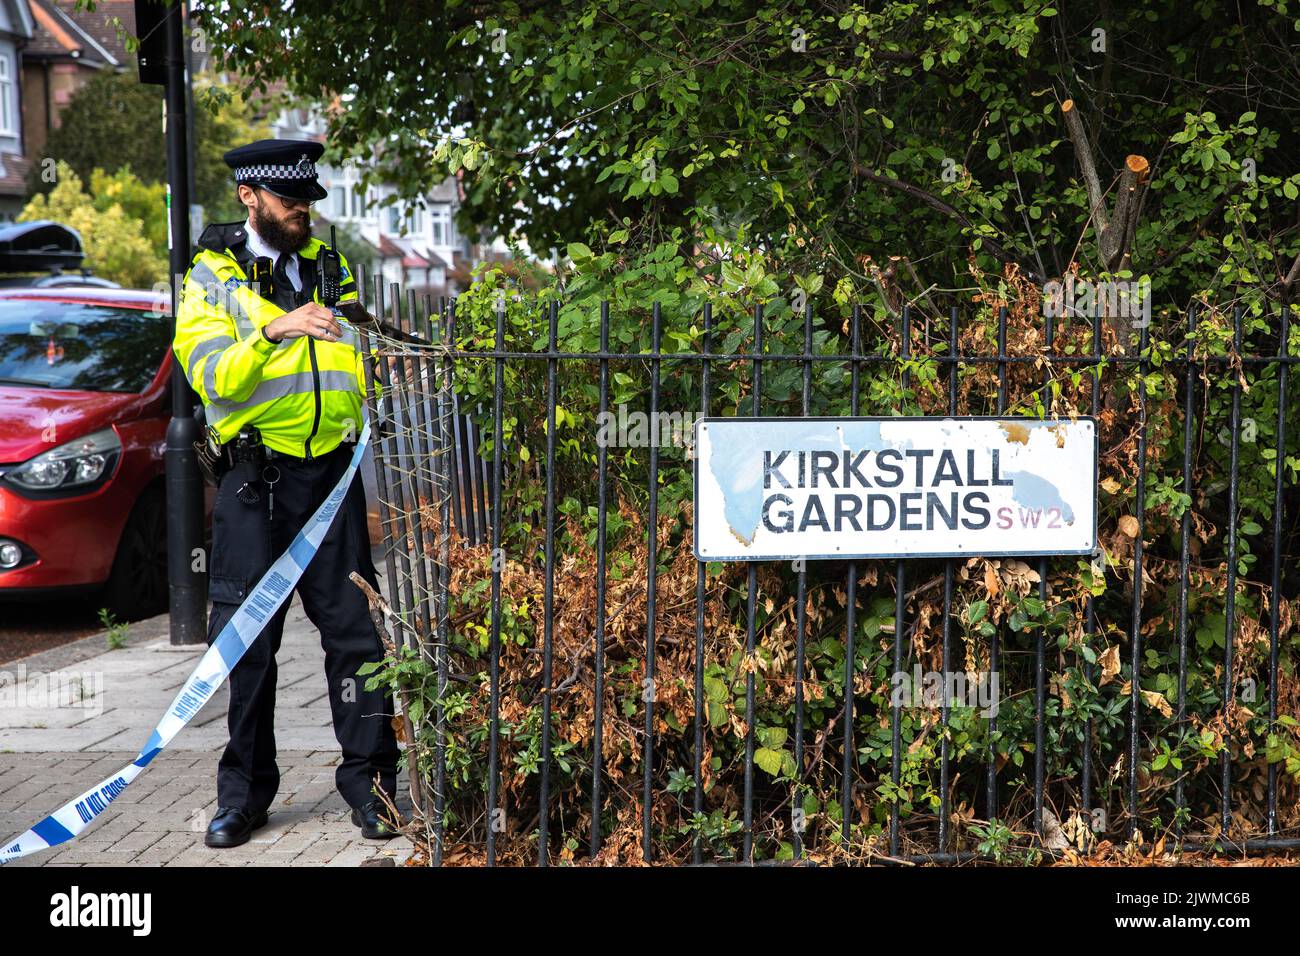 London, UK. 6th September, London, UK. Pollice crime scene following Streatham shooting: Chris Kaba died after being shot by police following pursuit. Date: 6/9/22 Photos: Stephanie Black Credit: Stephanie Black/Alamy Live News Stock Photo